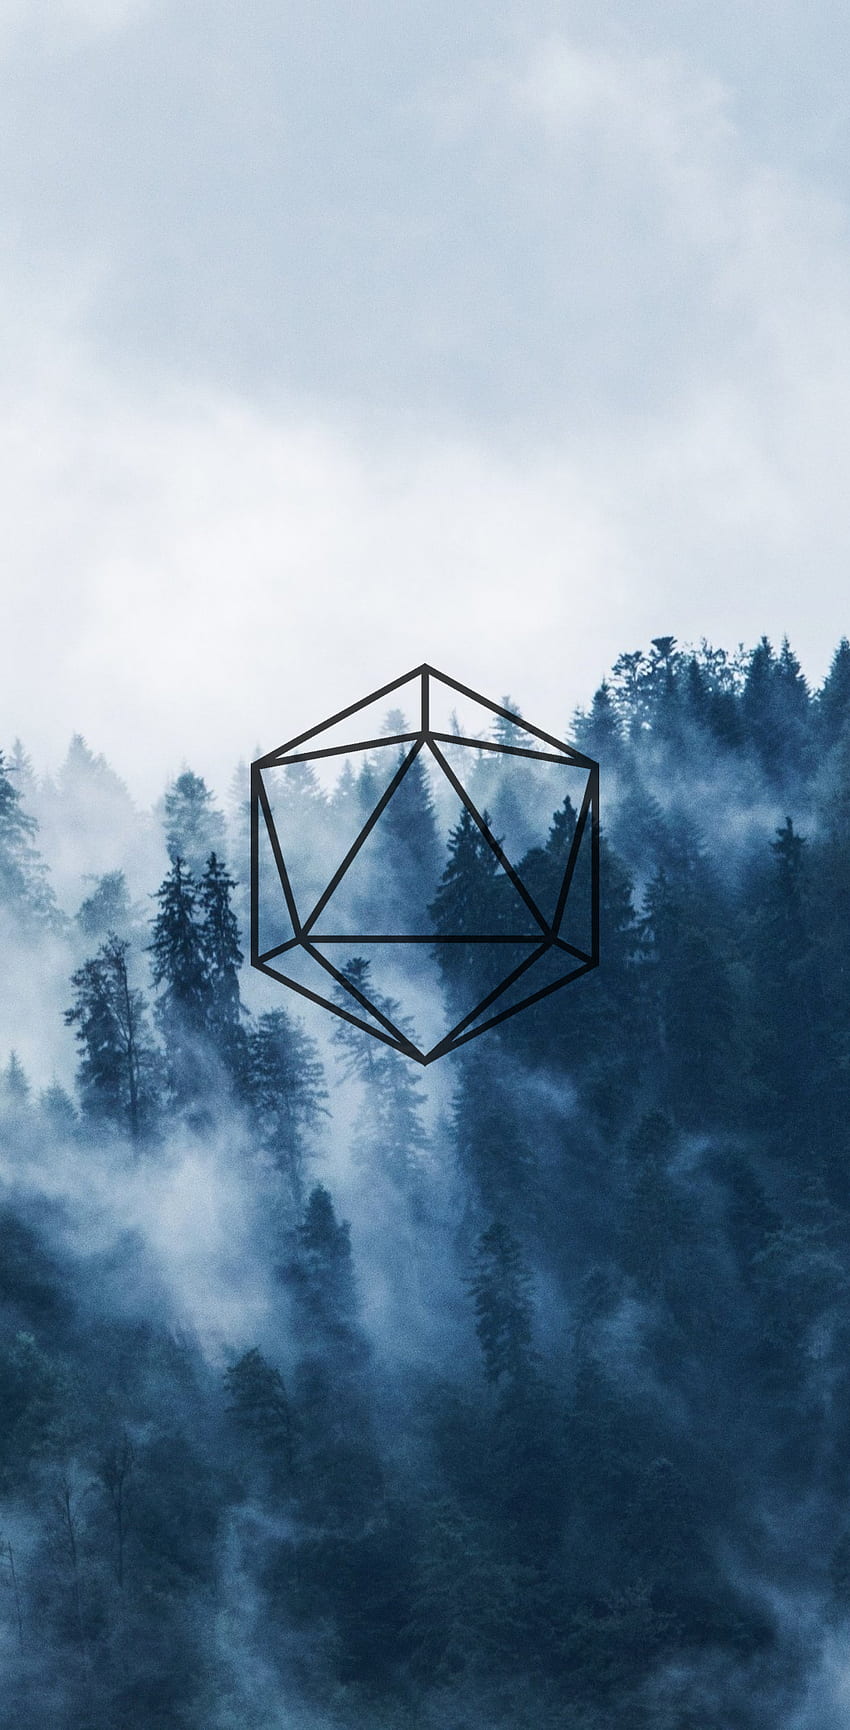 Making high resolution for you guys. : Odesza HD phone wallpaper